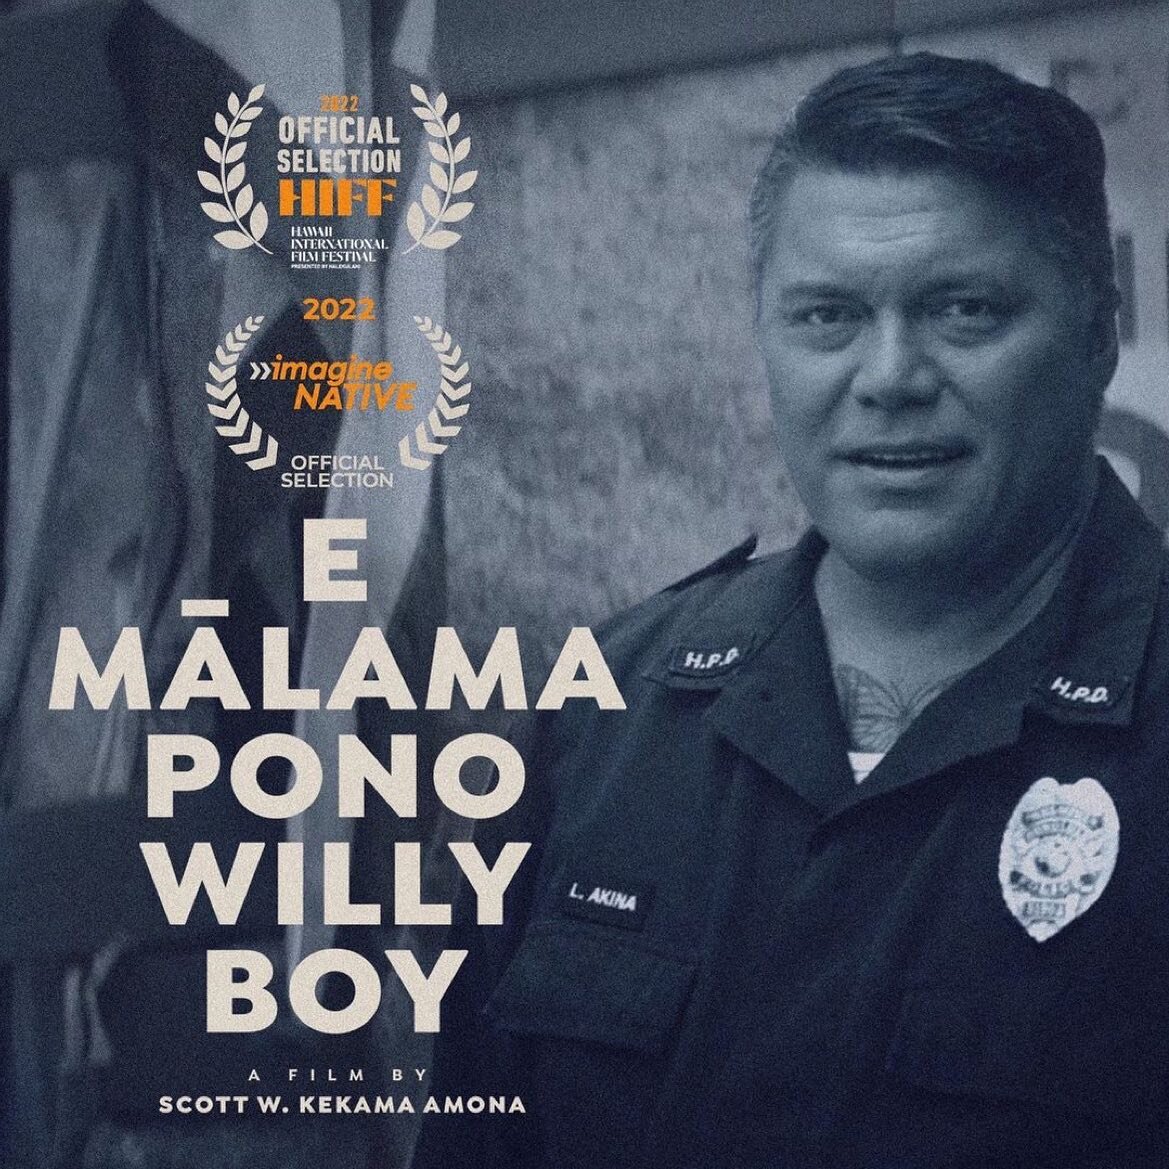 Congrats to #ohinalabs fellows @scottwkekamaamona and Nani K. Ross for their premiere of @emalamaponowillyboy at @hiffhawaii! We workshopped E MĀLAMA PONO, WILLY BOY at the 2018 lab with this year&rsquo;s return mentor, @dledouxm. Catch the encore sc